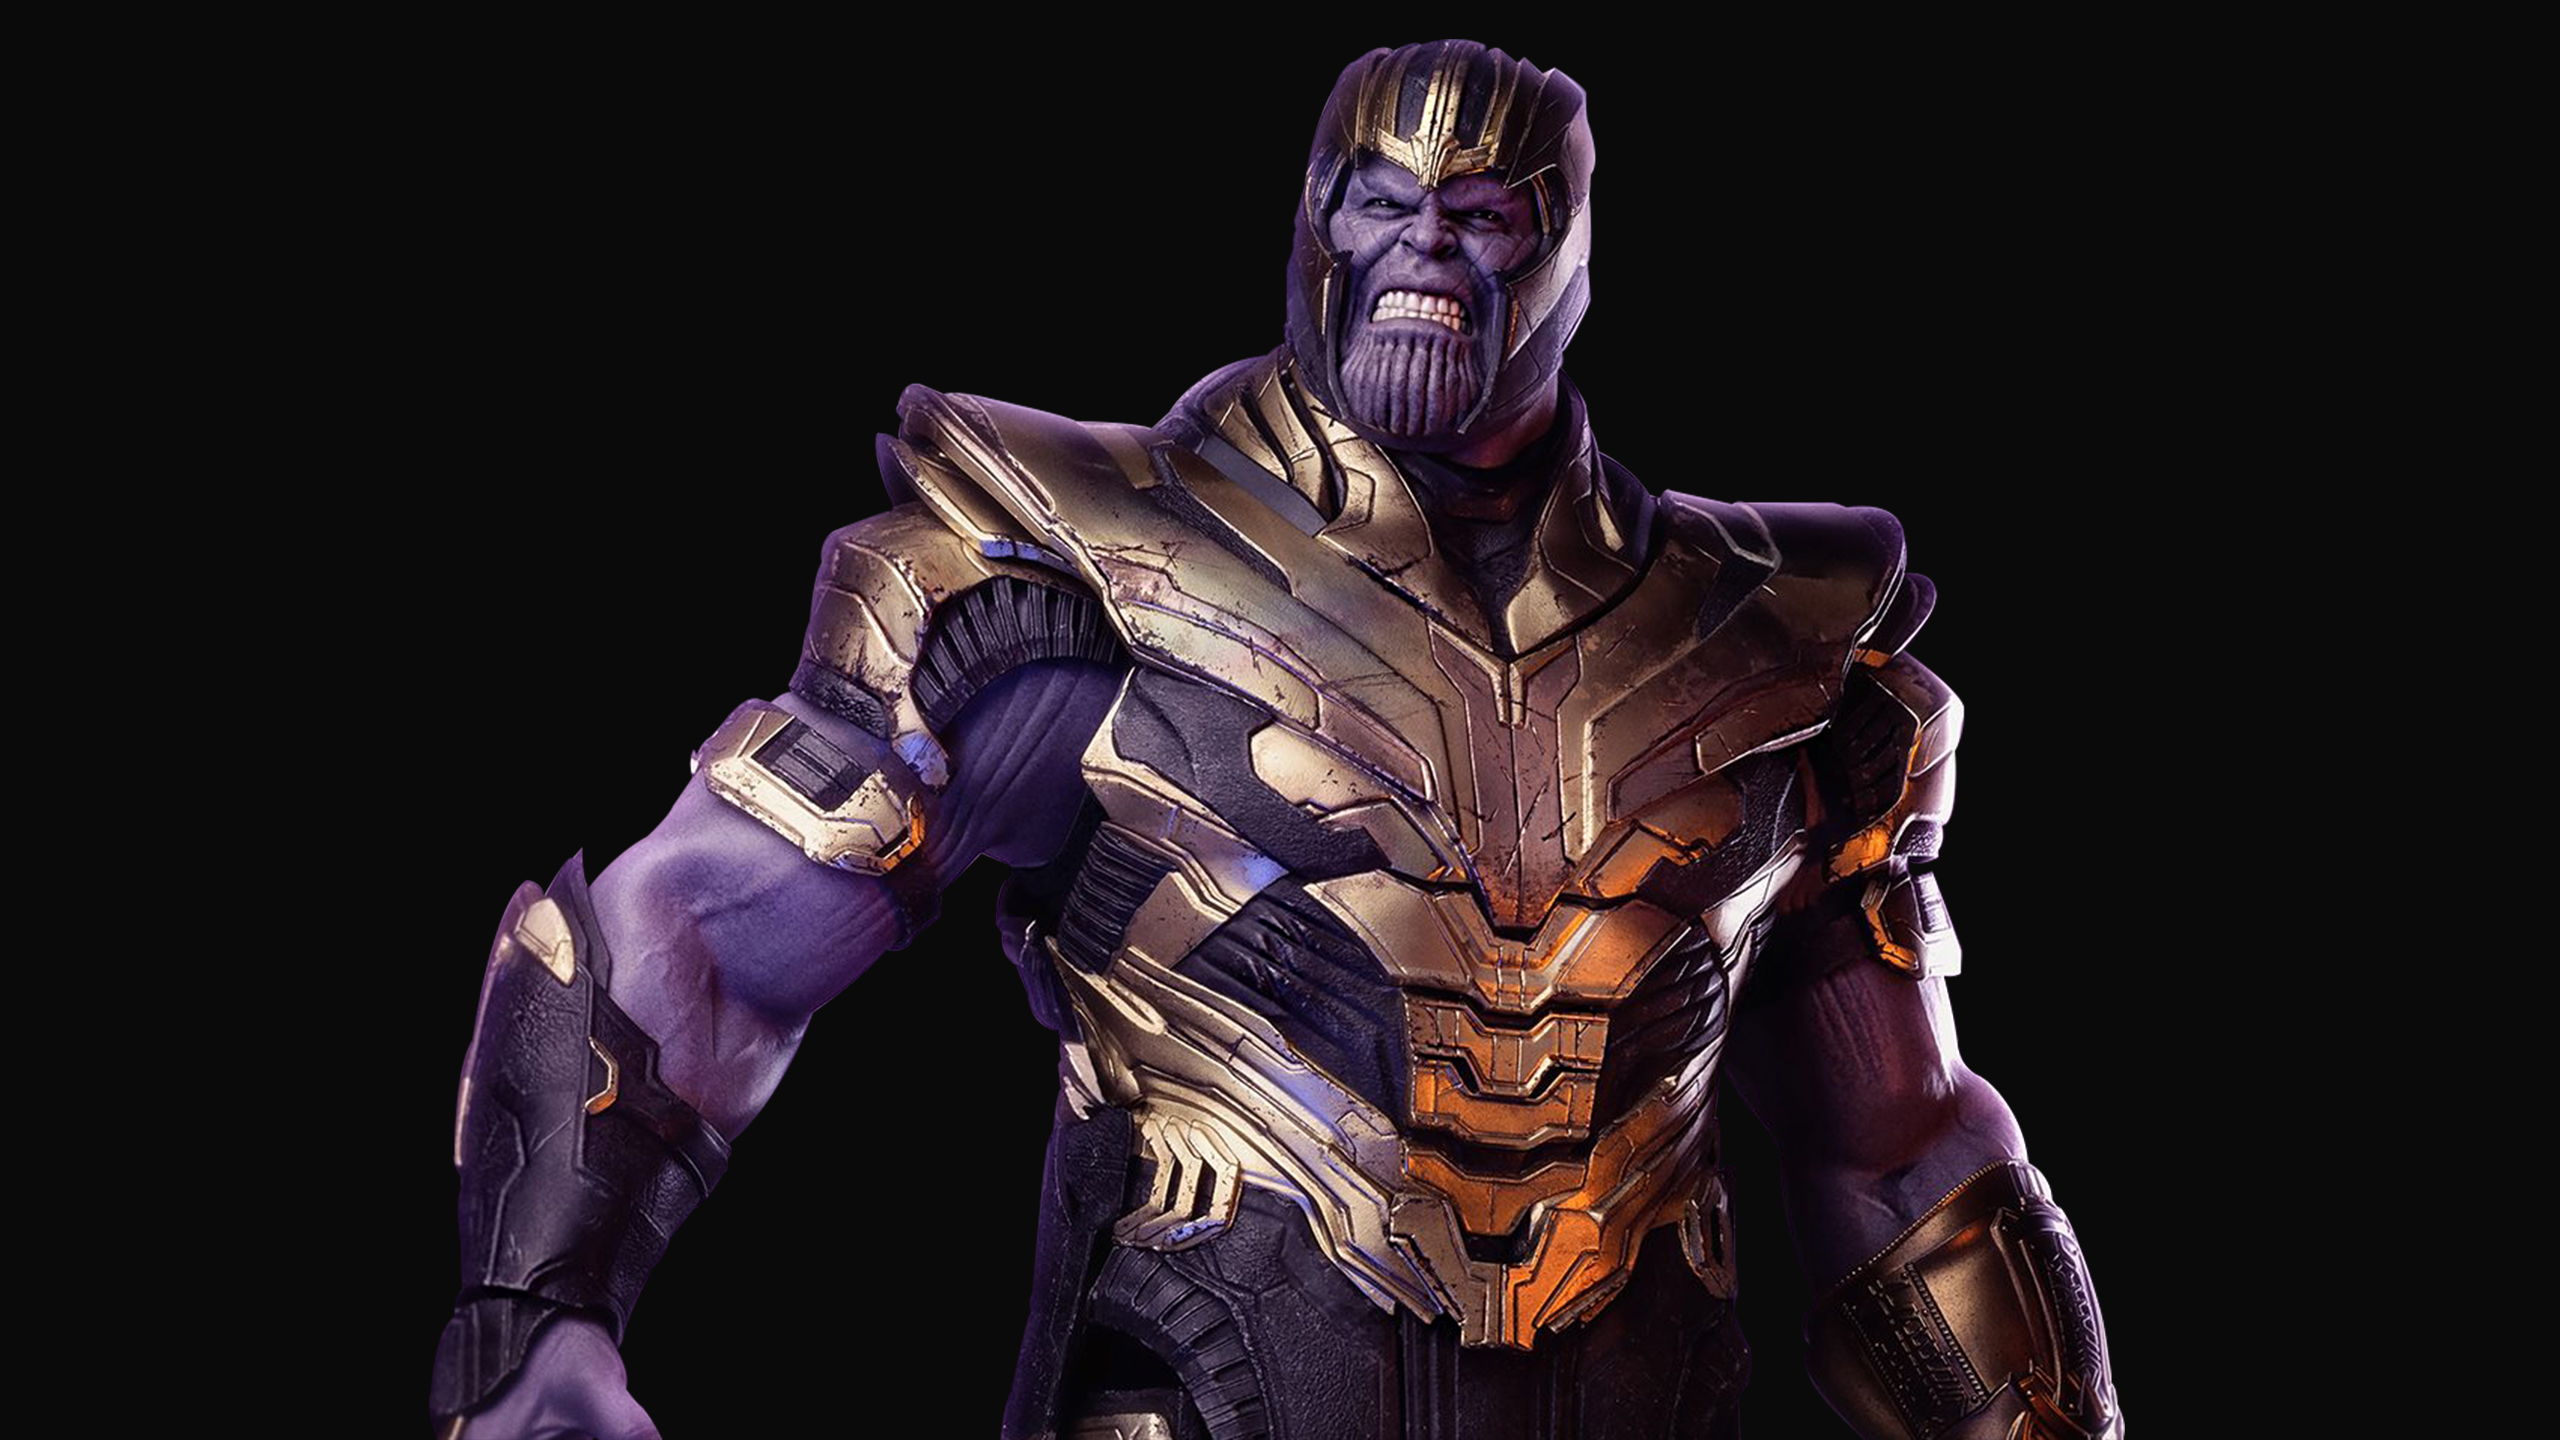 1080x24002 Thanos in Avengers Endgame 1080x24002 Resolution Wallpaper, HD  Movies 4K Wallpapers, Images, Photos and Background - Wallpapers Den